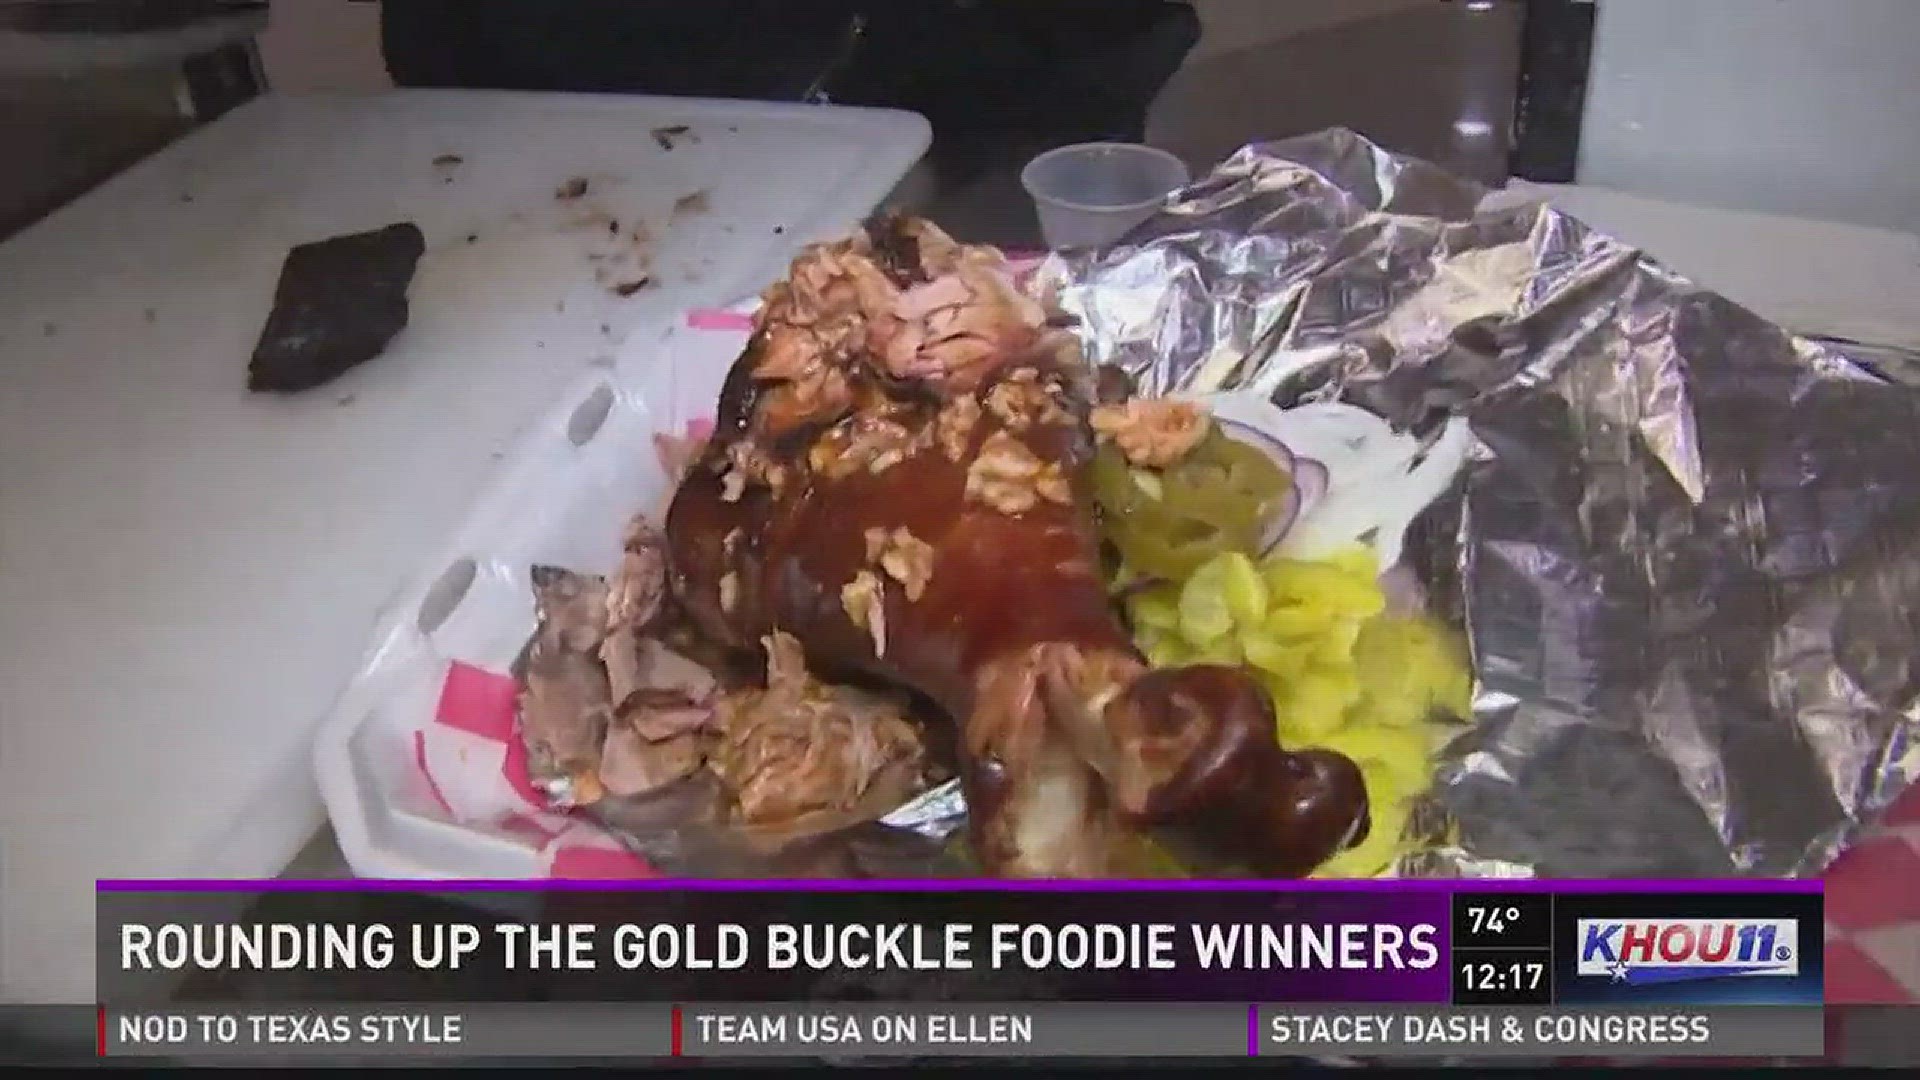 Rodeo Houston has awarded its Gold Buckle Foodie Awards for 2018.